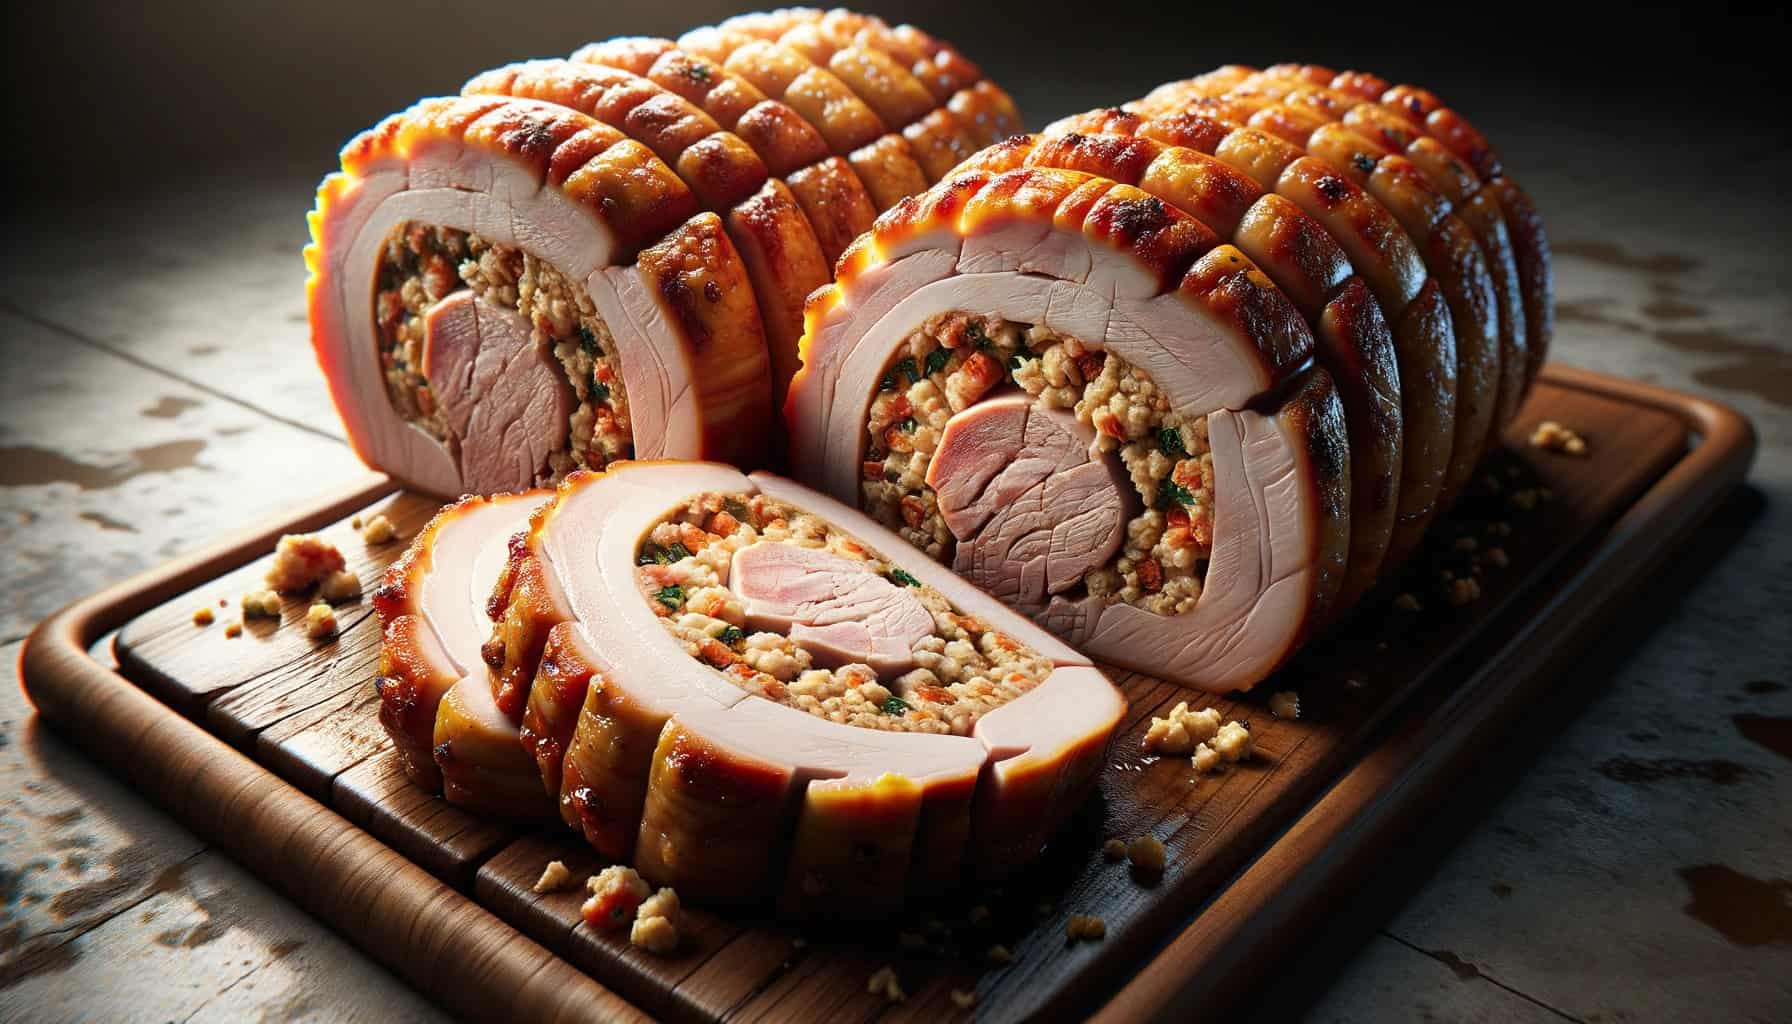 Lombo recheado (stuffed pork loin) sliced and arranged on a wooden board. The slices reveal the rich stuffing inside the pork loin, with textures of the meat and stuffing detailed and prominent.